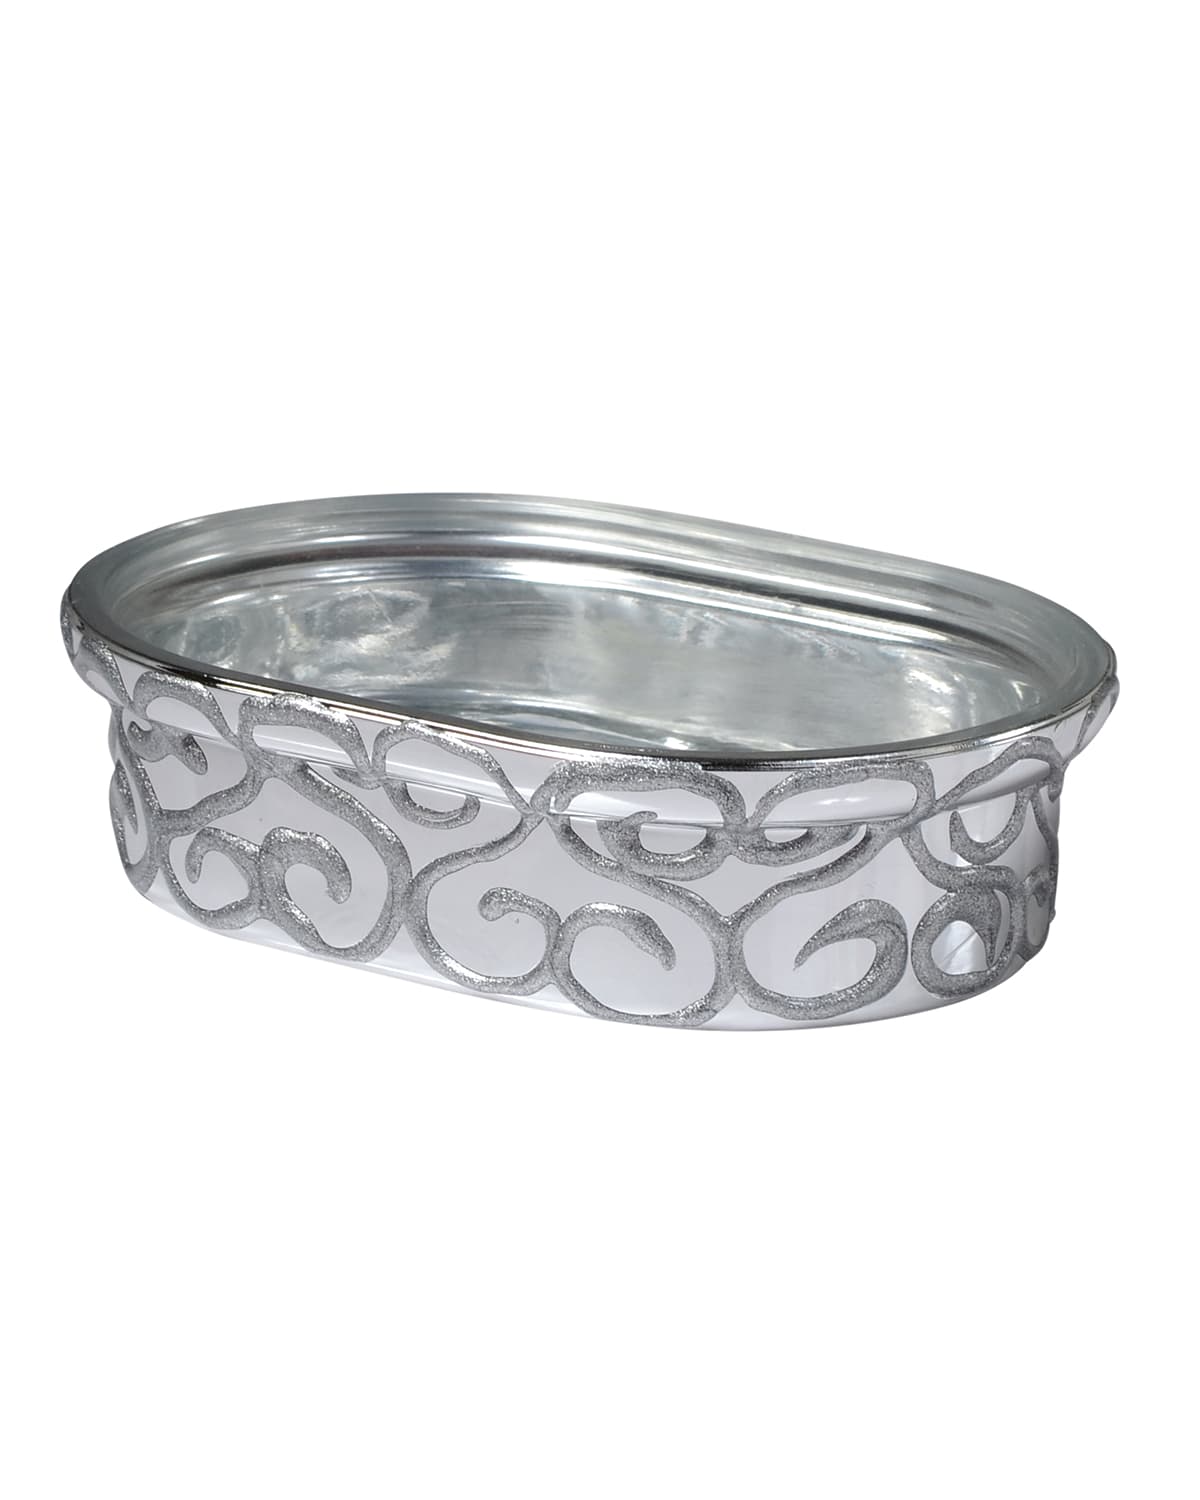 Image Mike & Ally Jamila Glass Soap Dish, Silver